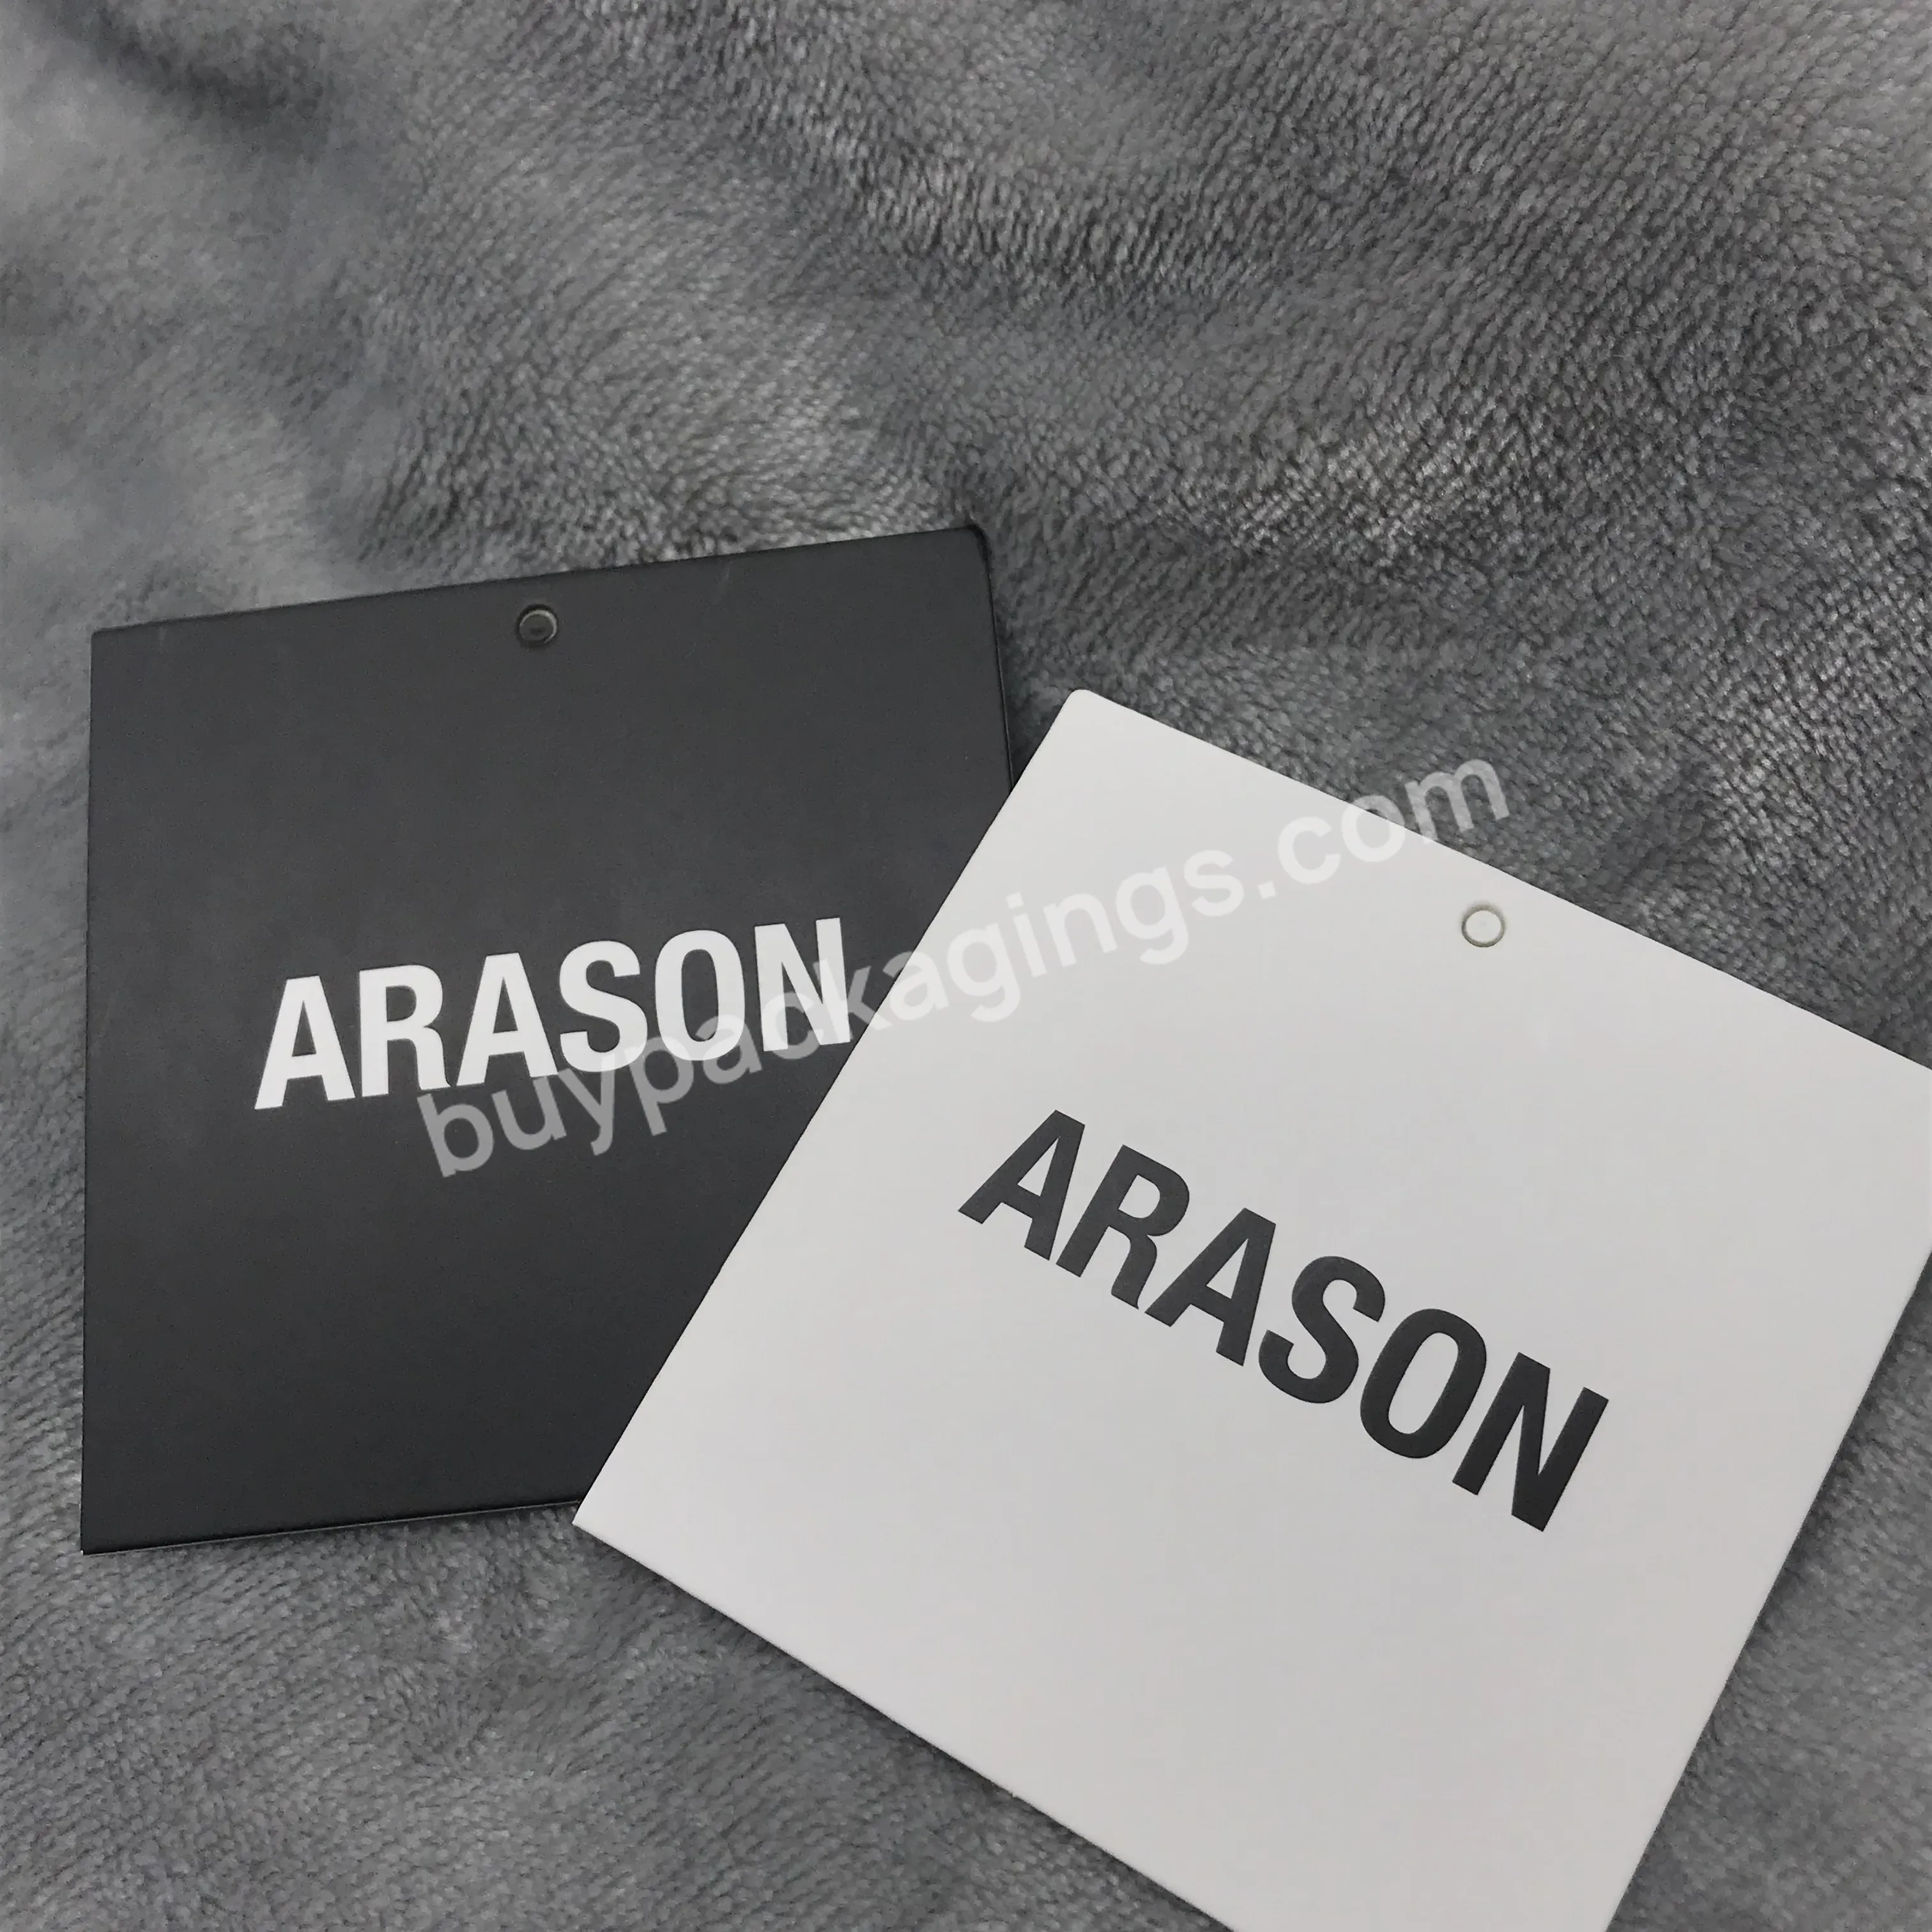 Simple Production Of All Kinds Of High-grade Brand Printed Tags And Cowboy Coated. - Buy Security Garment Tags,Garment Swing Tag,Garment Tags.